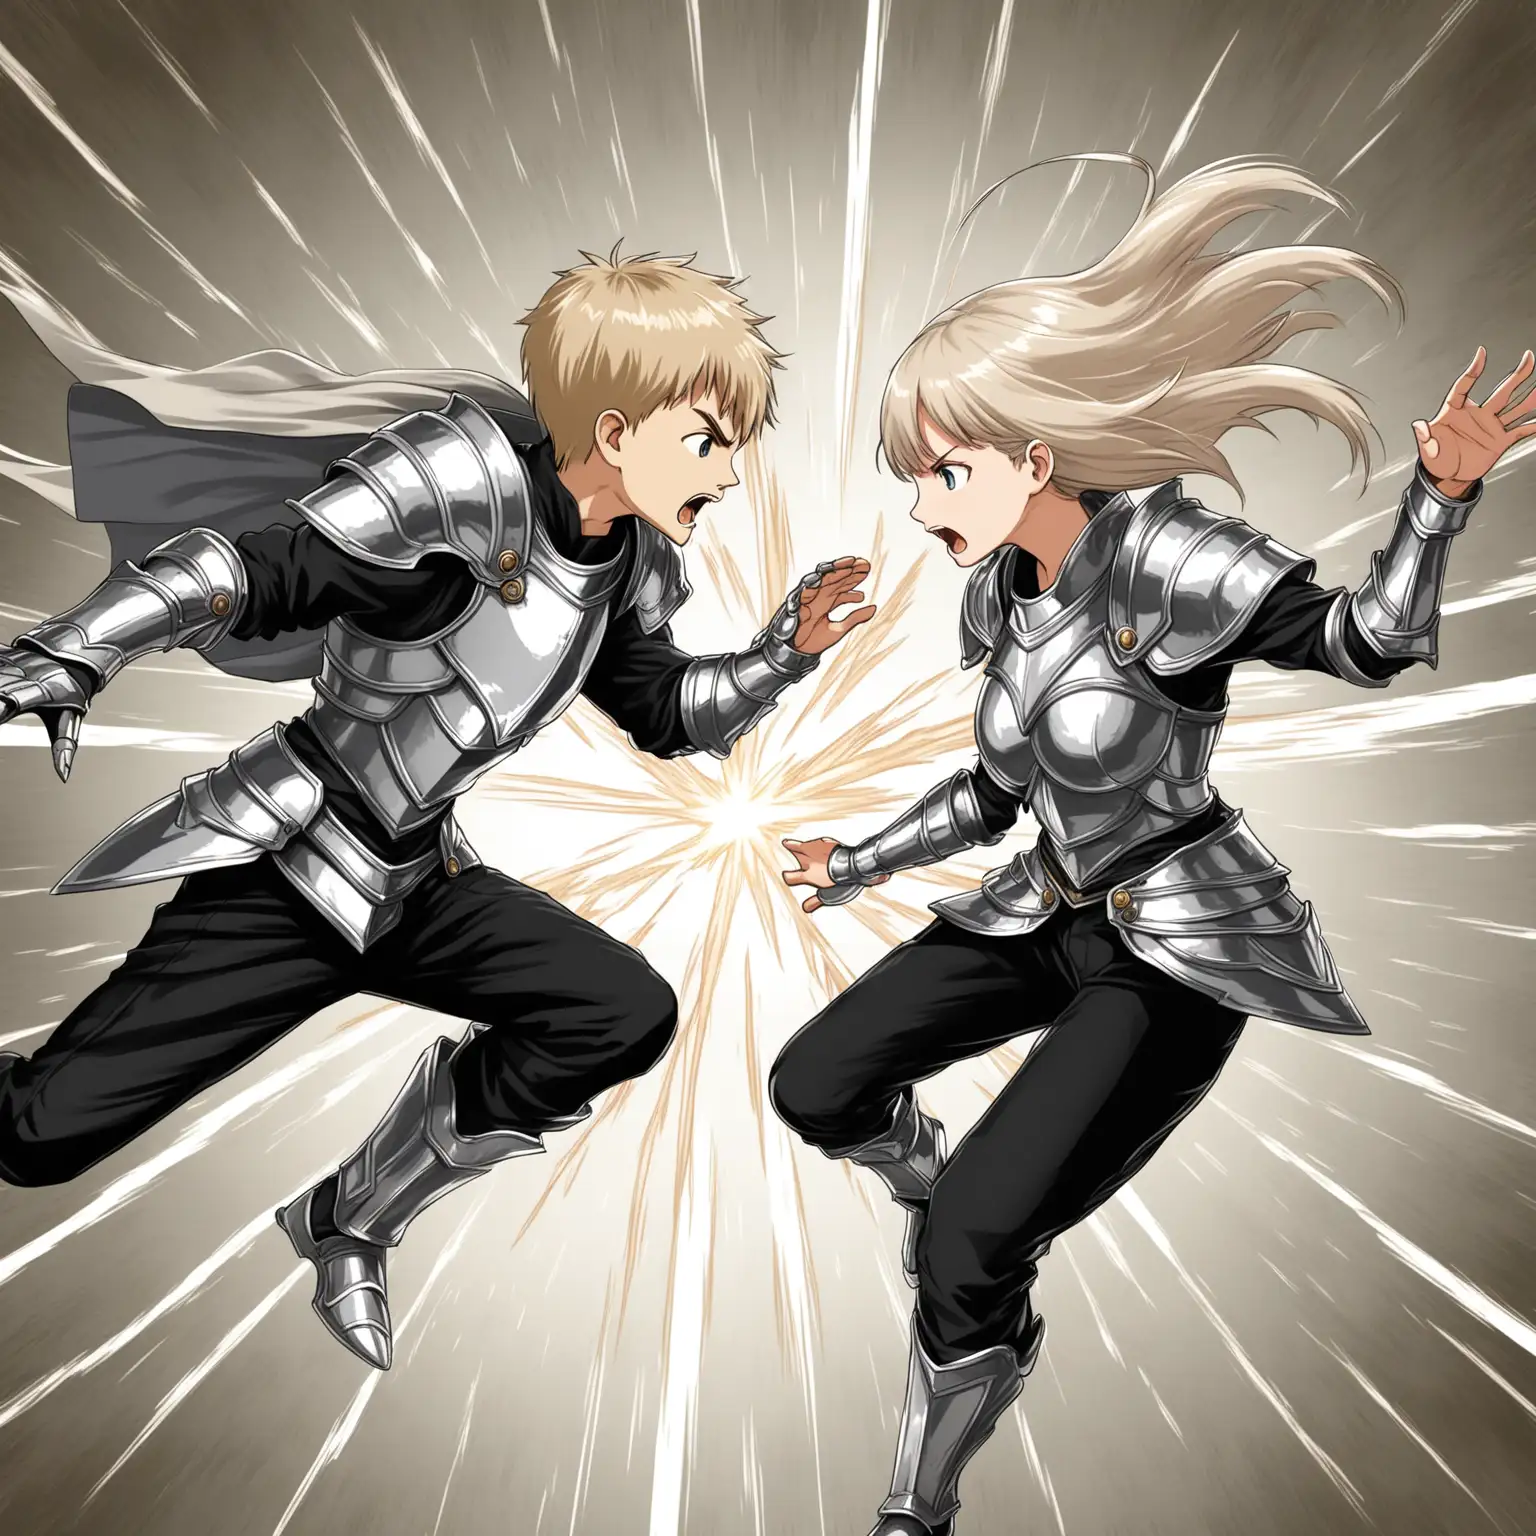 Dynamic Twins in Silver Adventurers Armor Defending Against Attacks